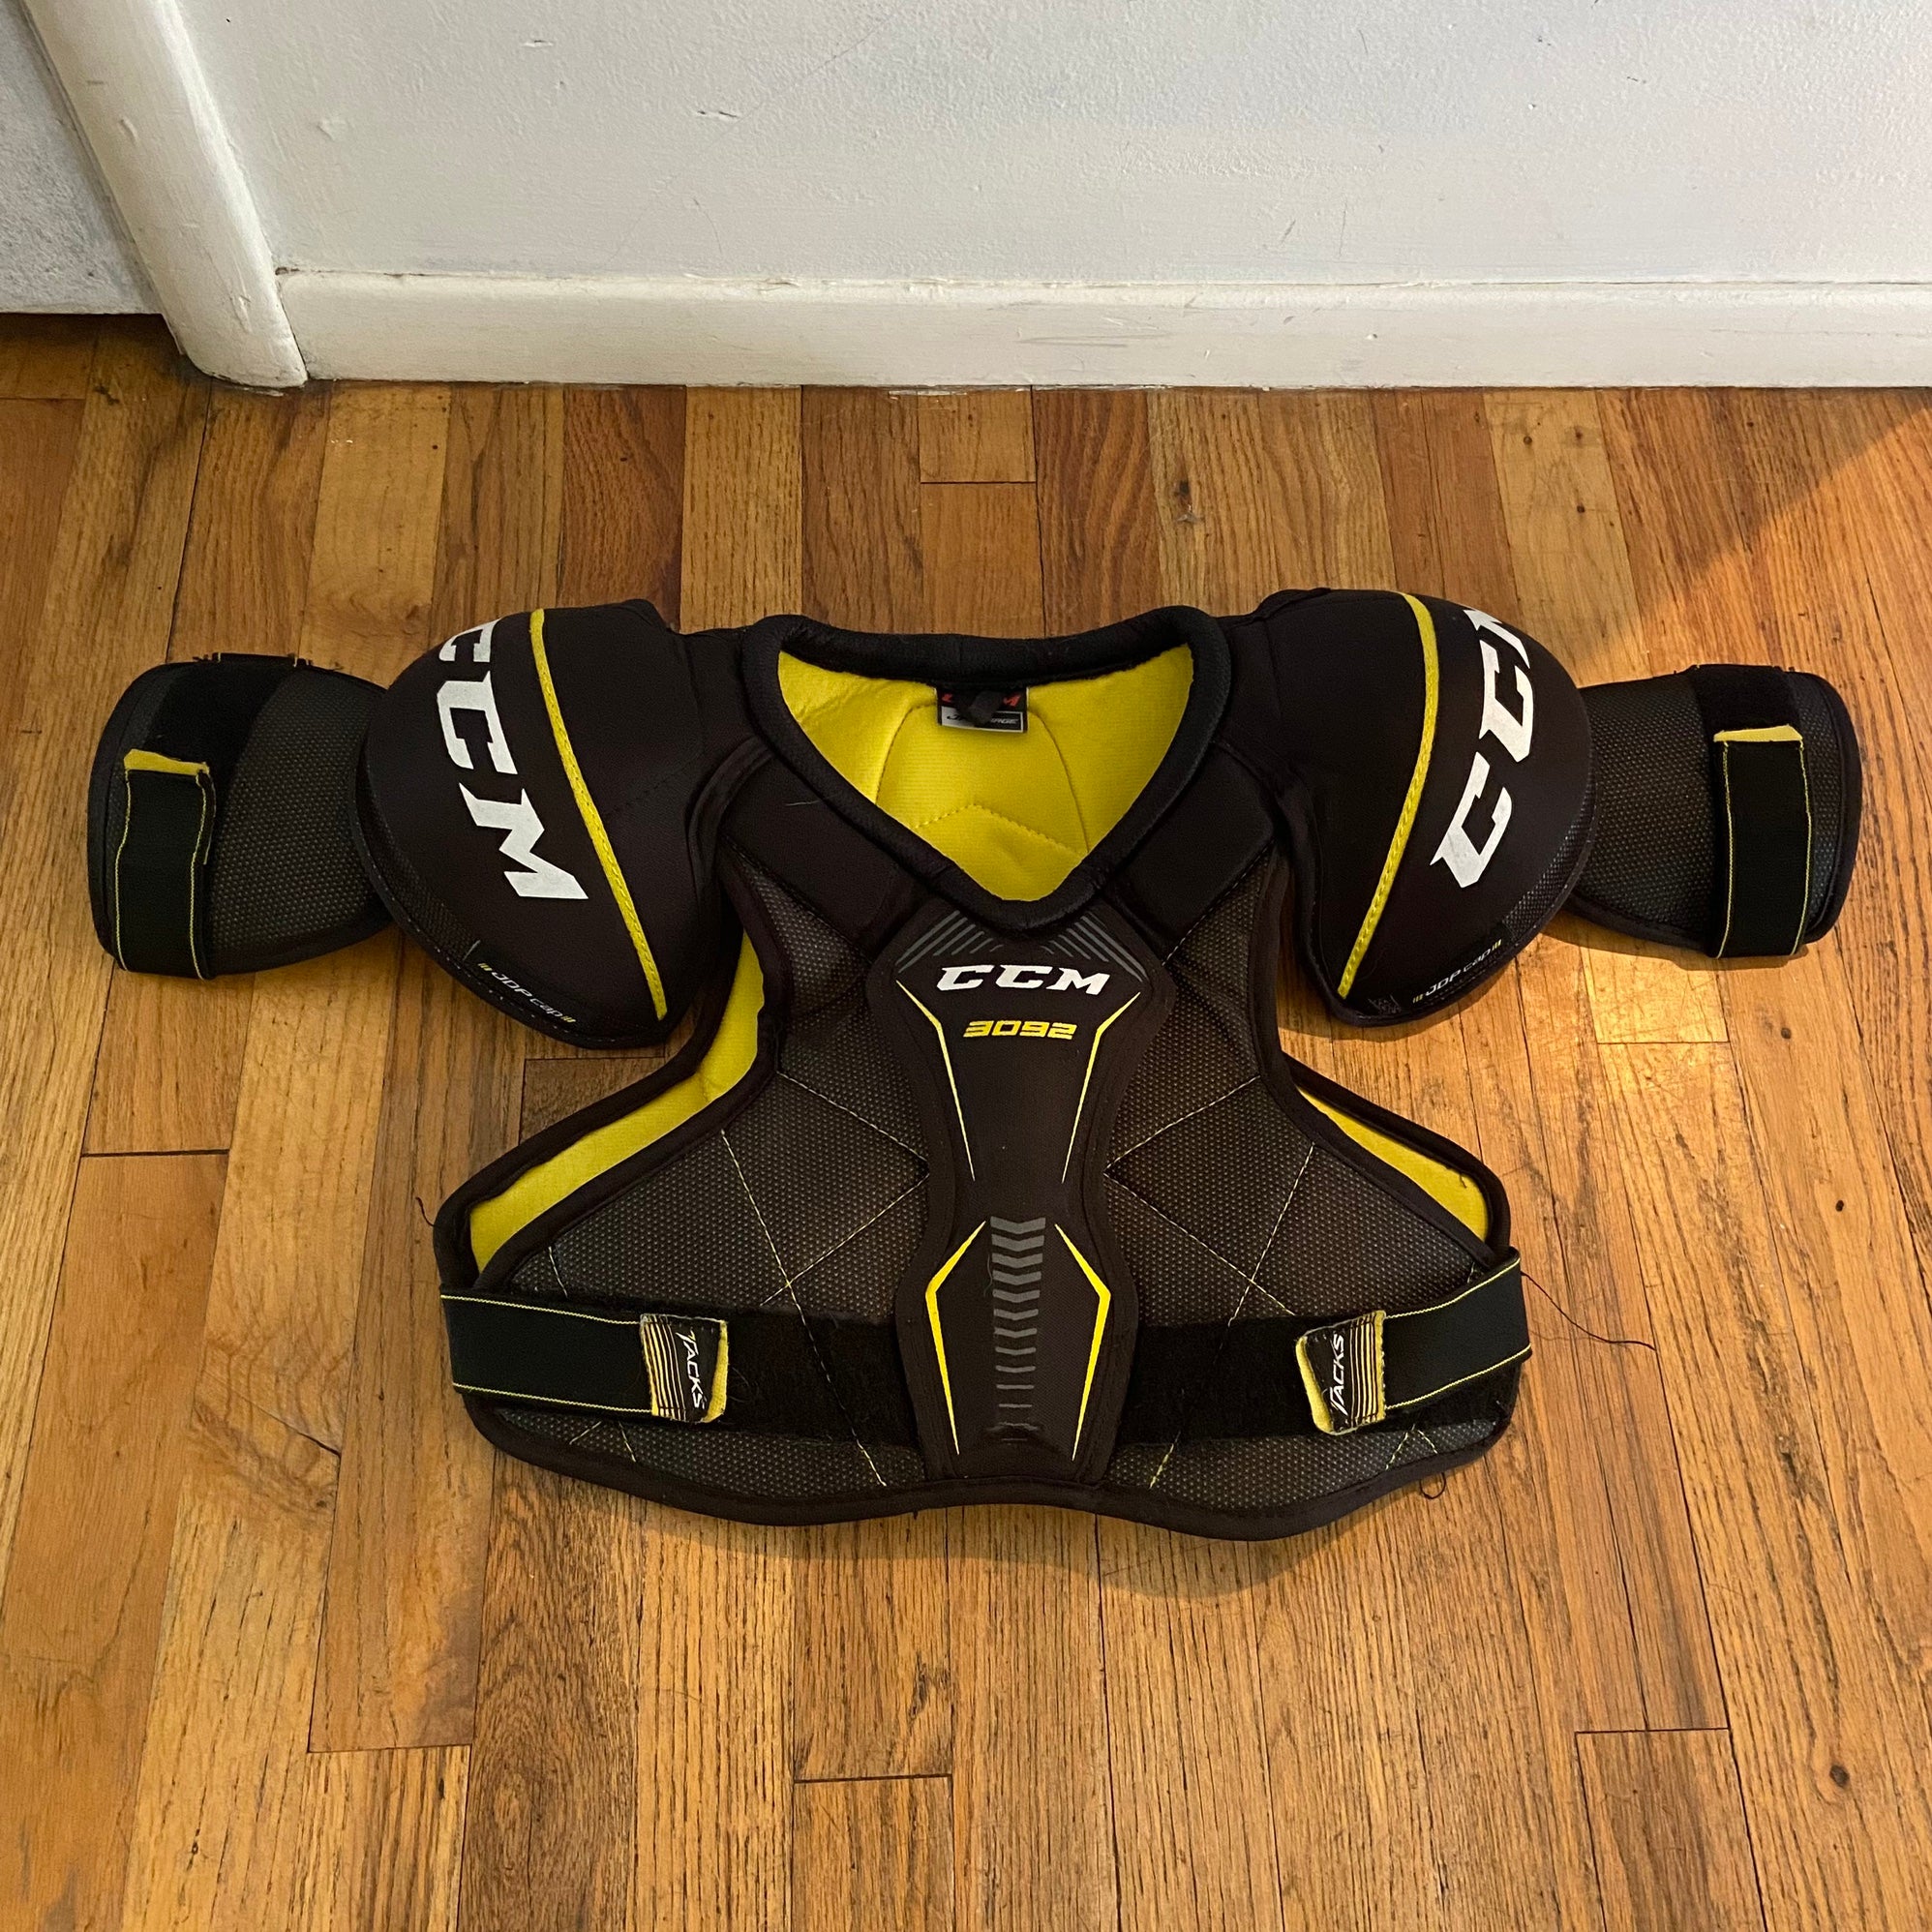 Used CCM NHL LTP Junior Hockey Shoulder Pads Size Youth Small –  cssportinggoods